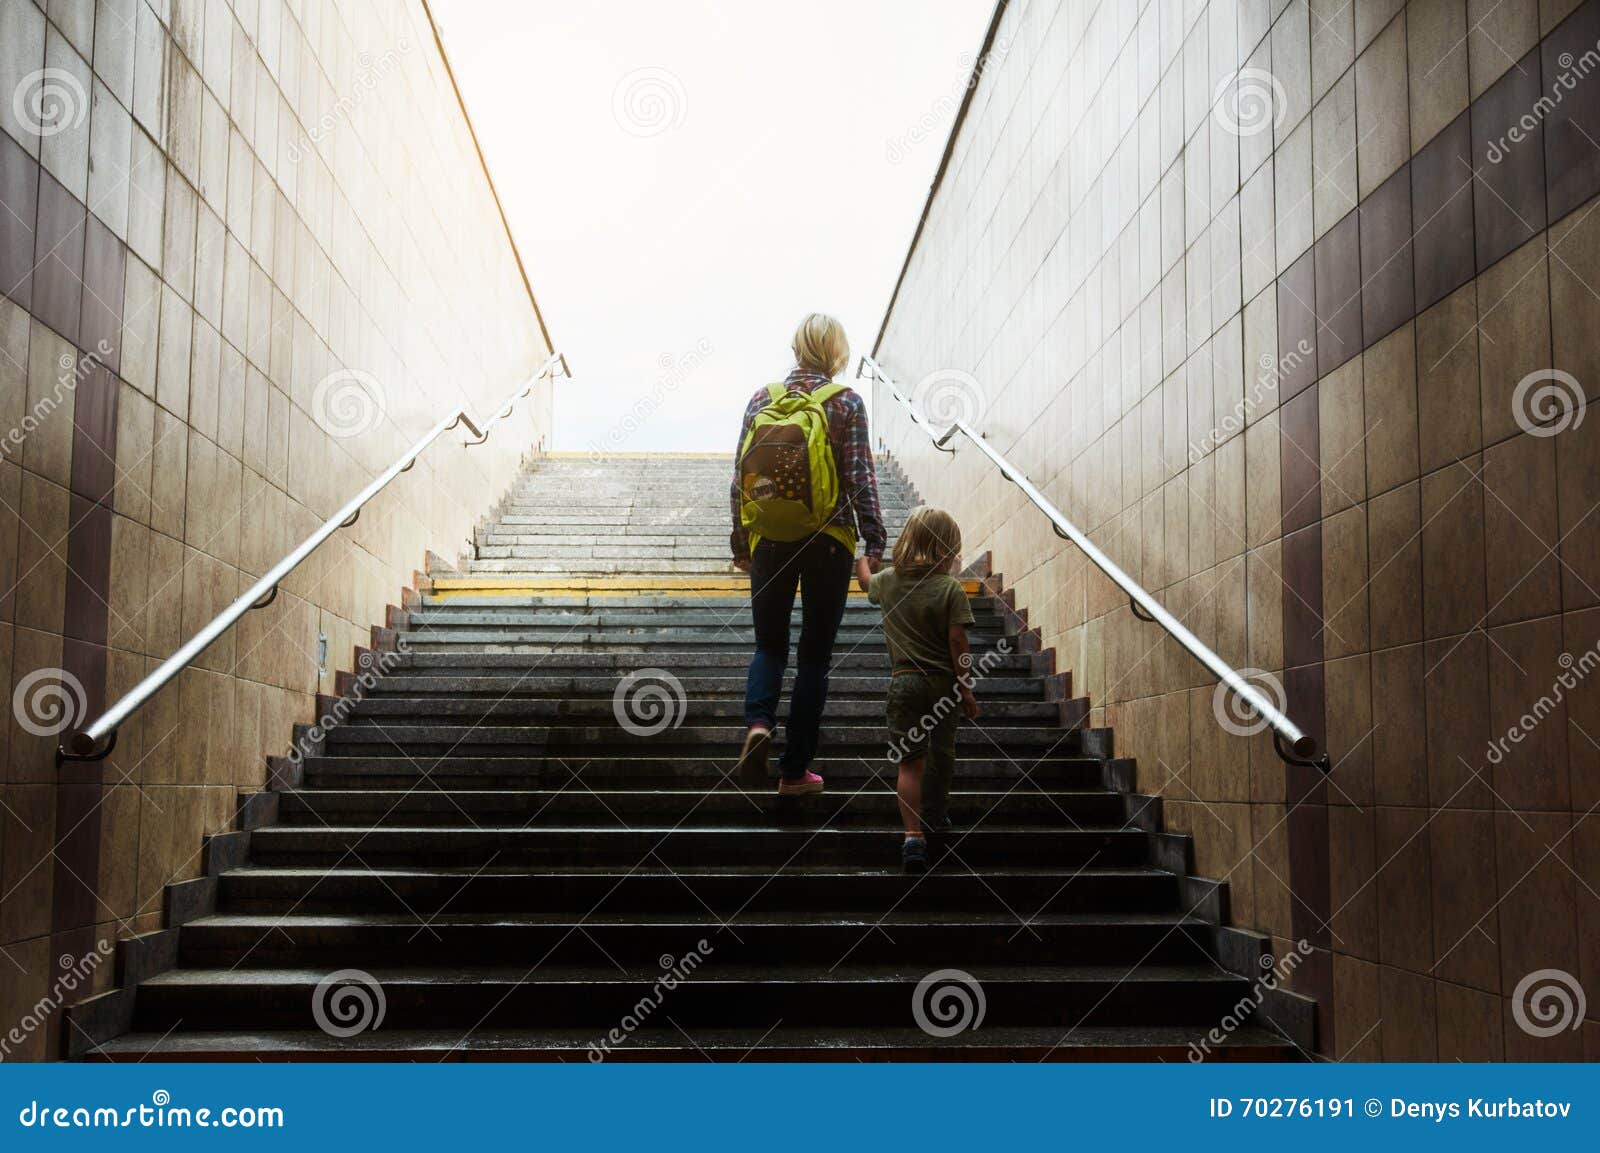 Mother and Son Climbing Stairs Stock Image - Image of exit, stairway ...